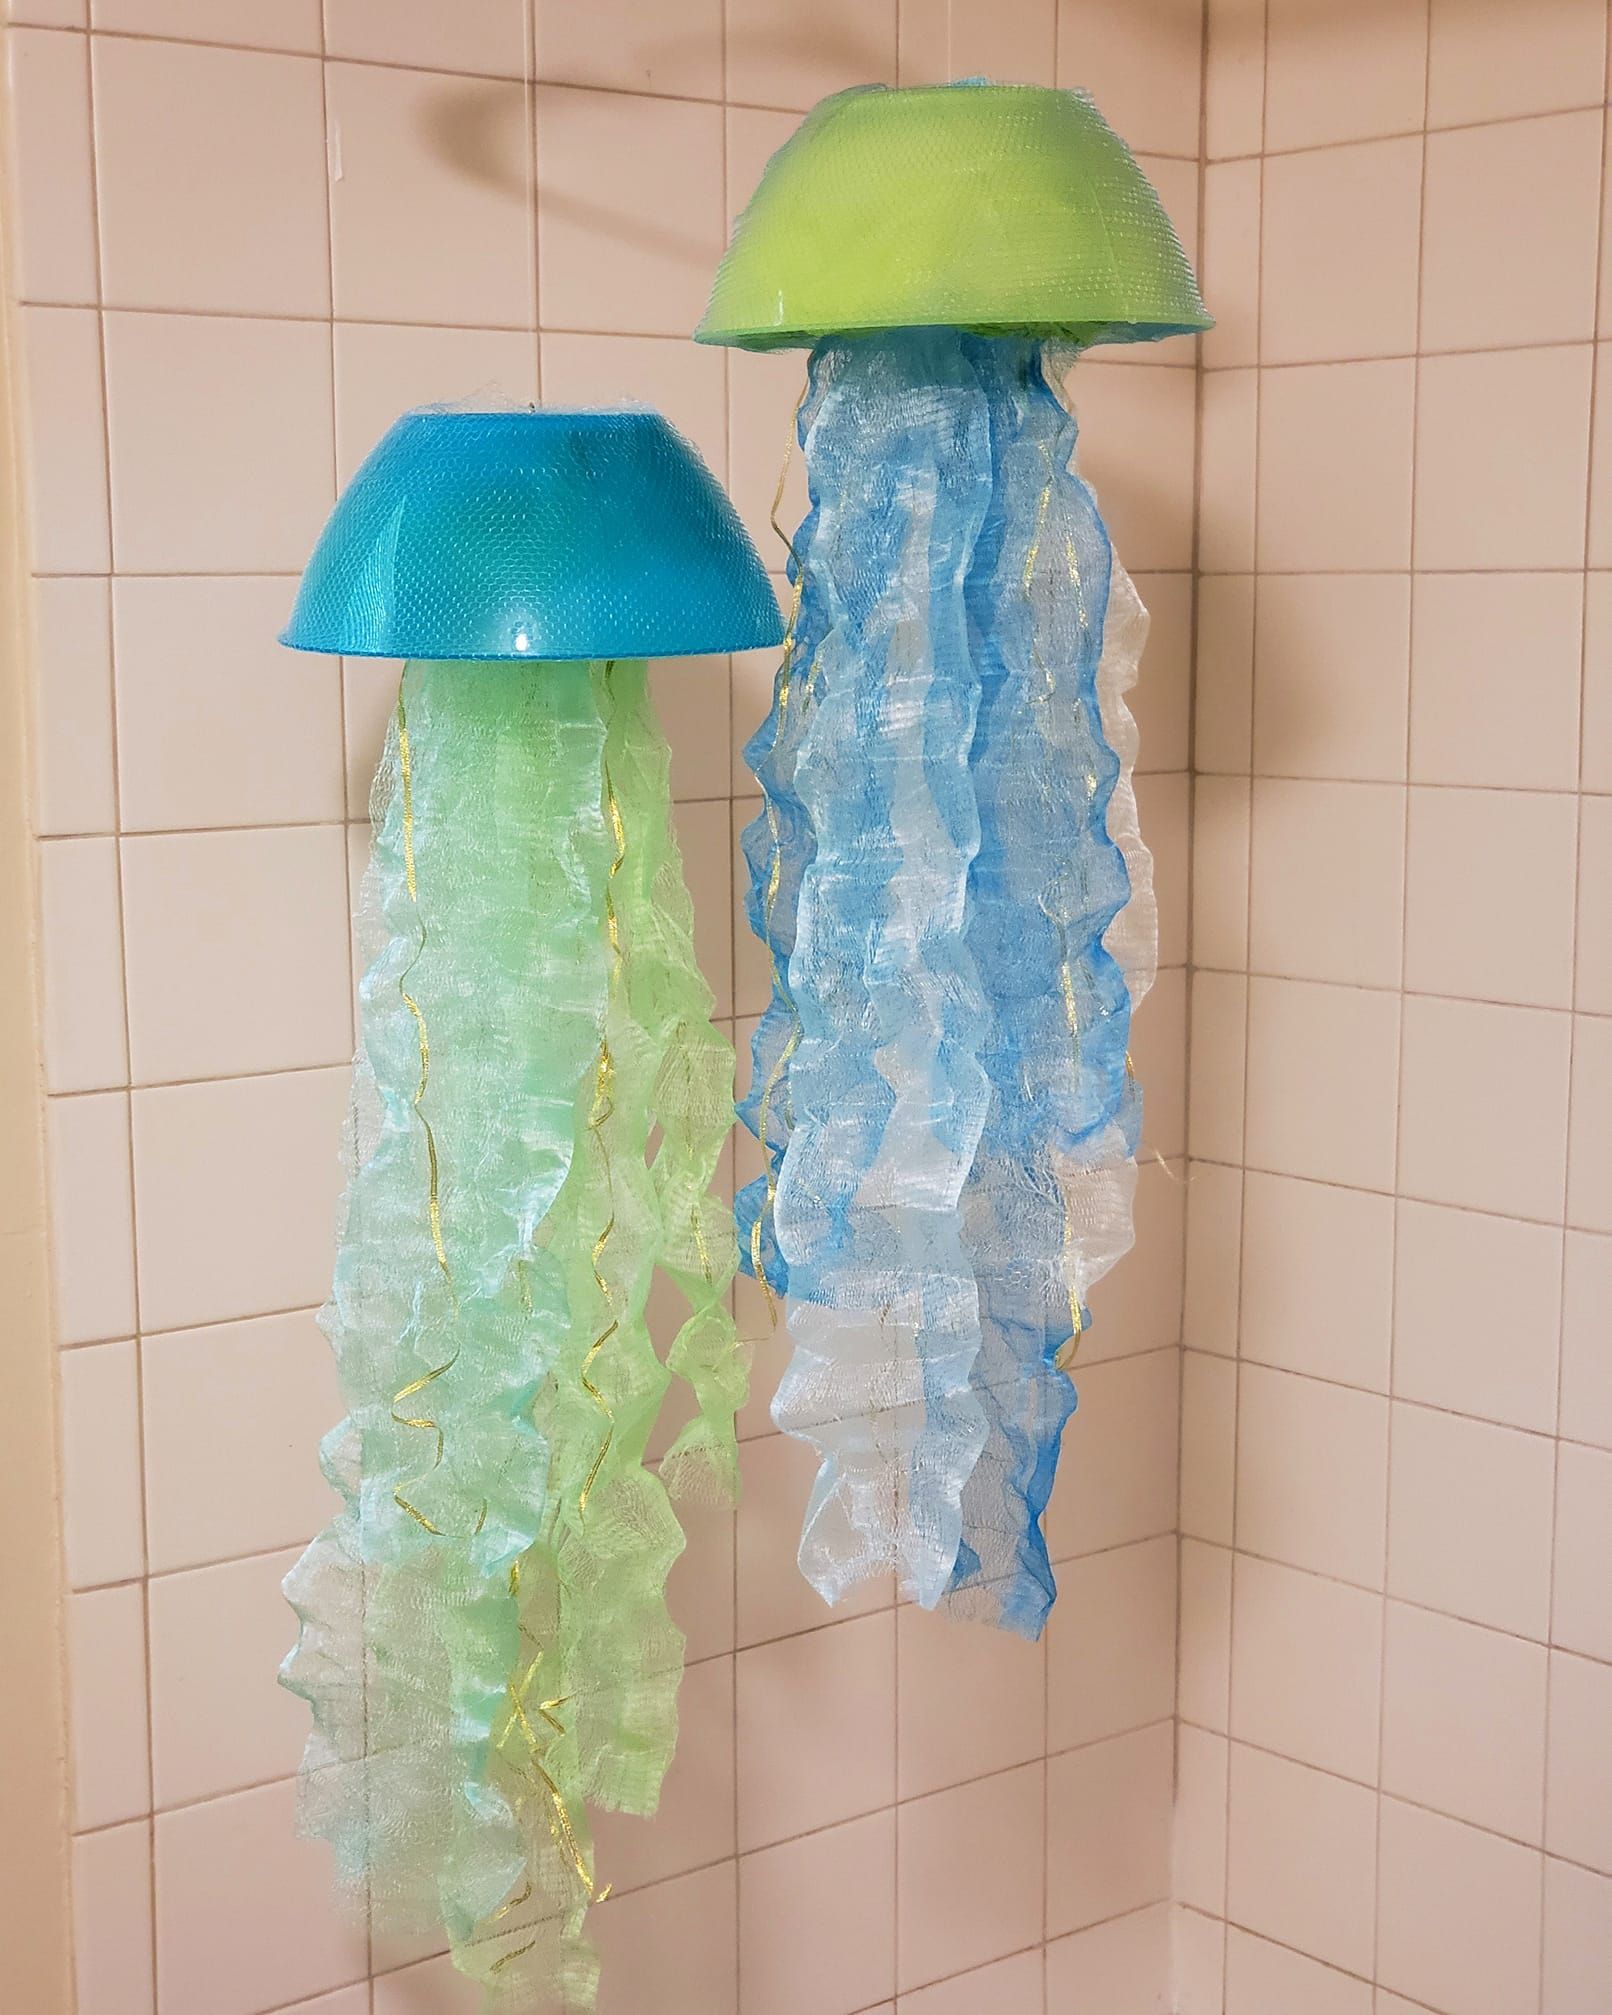 Two green and blue hanging lamps that look like jellyfish. 